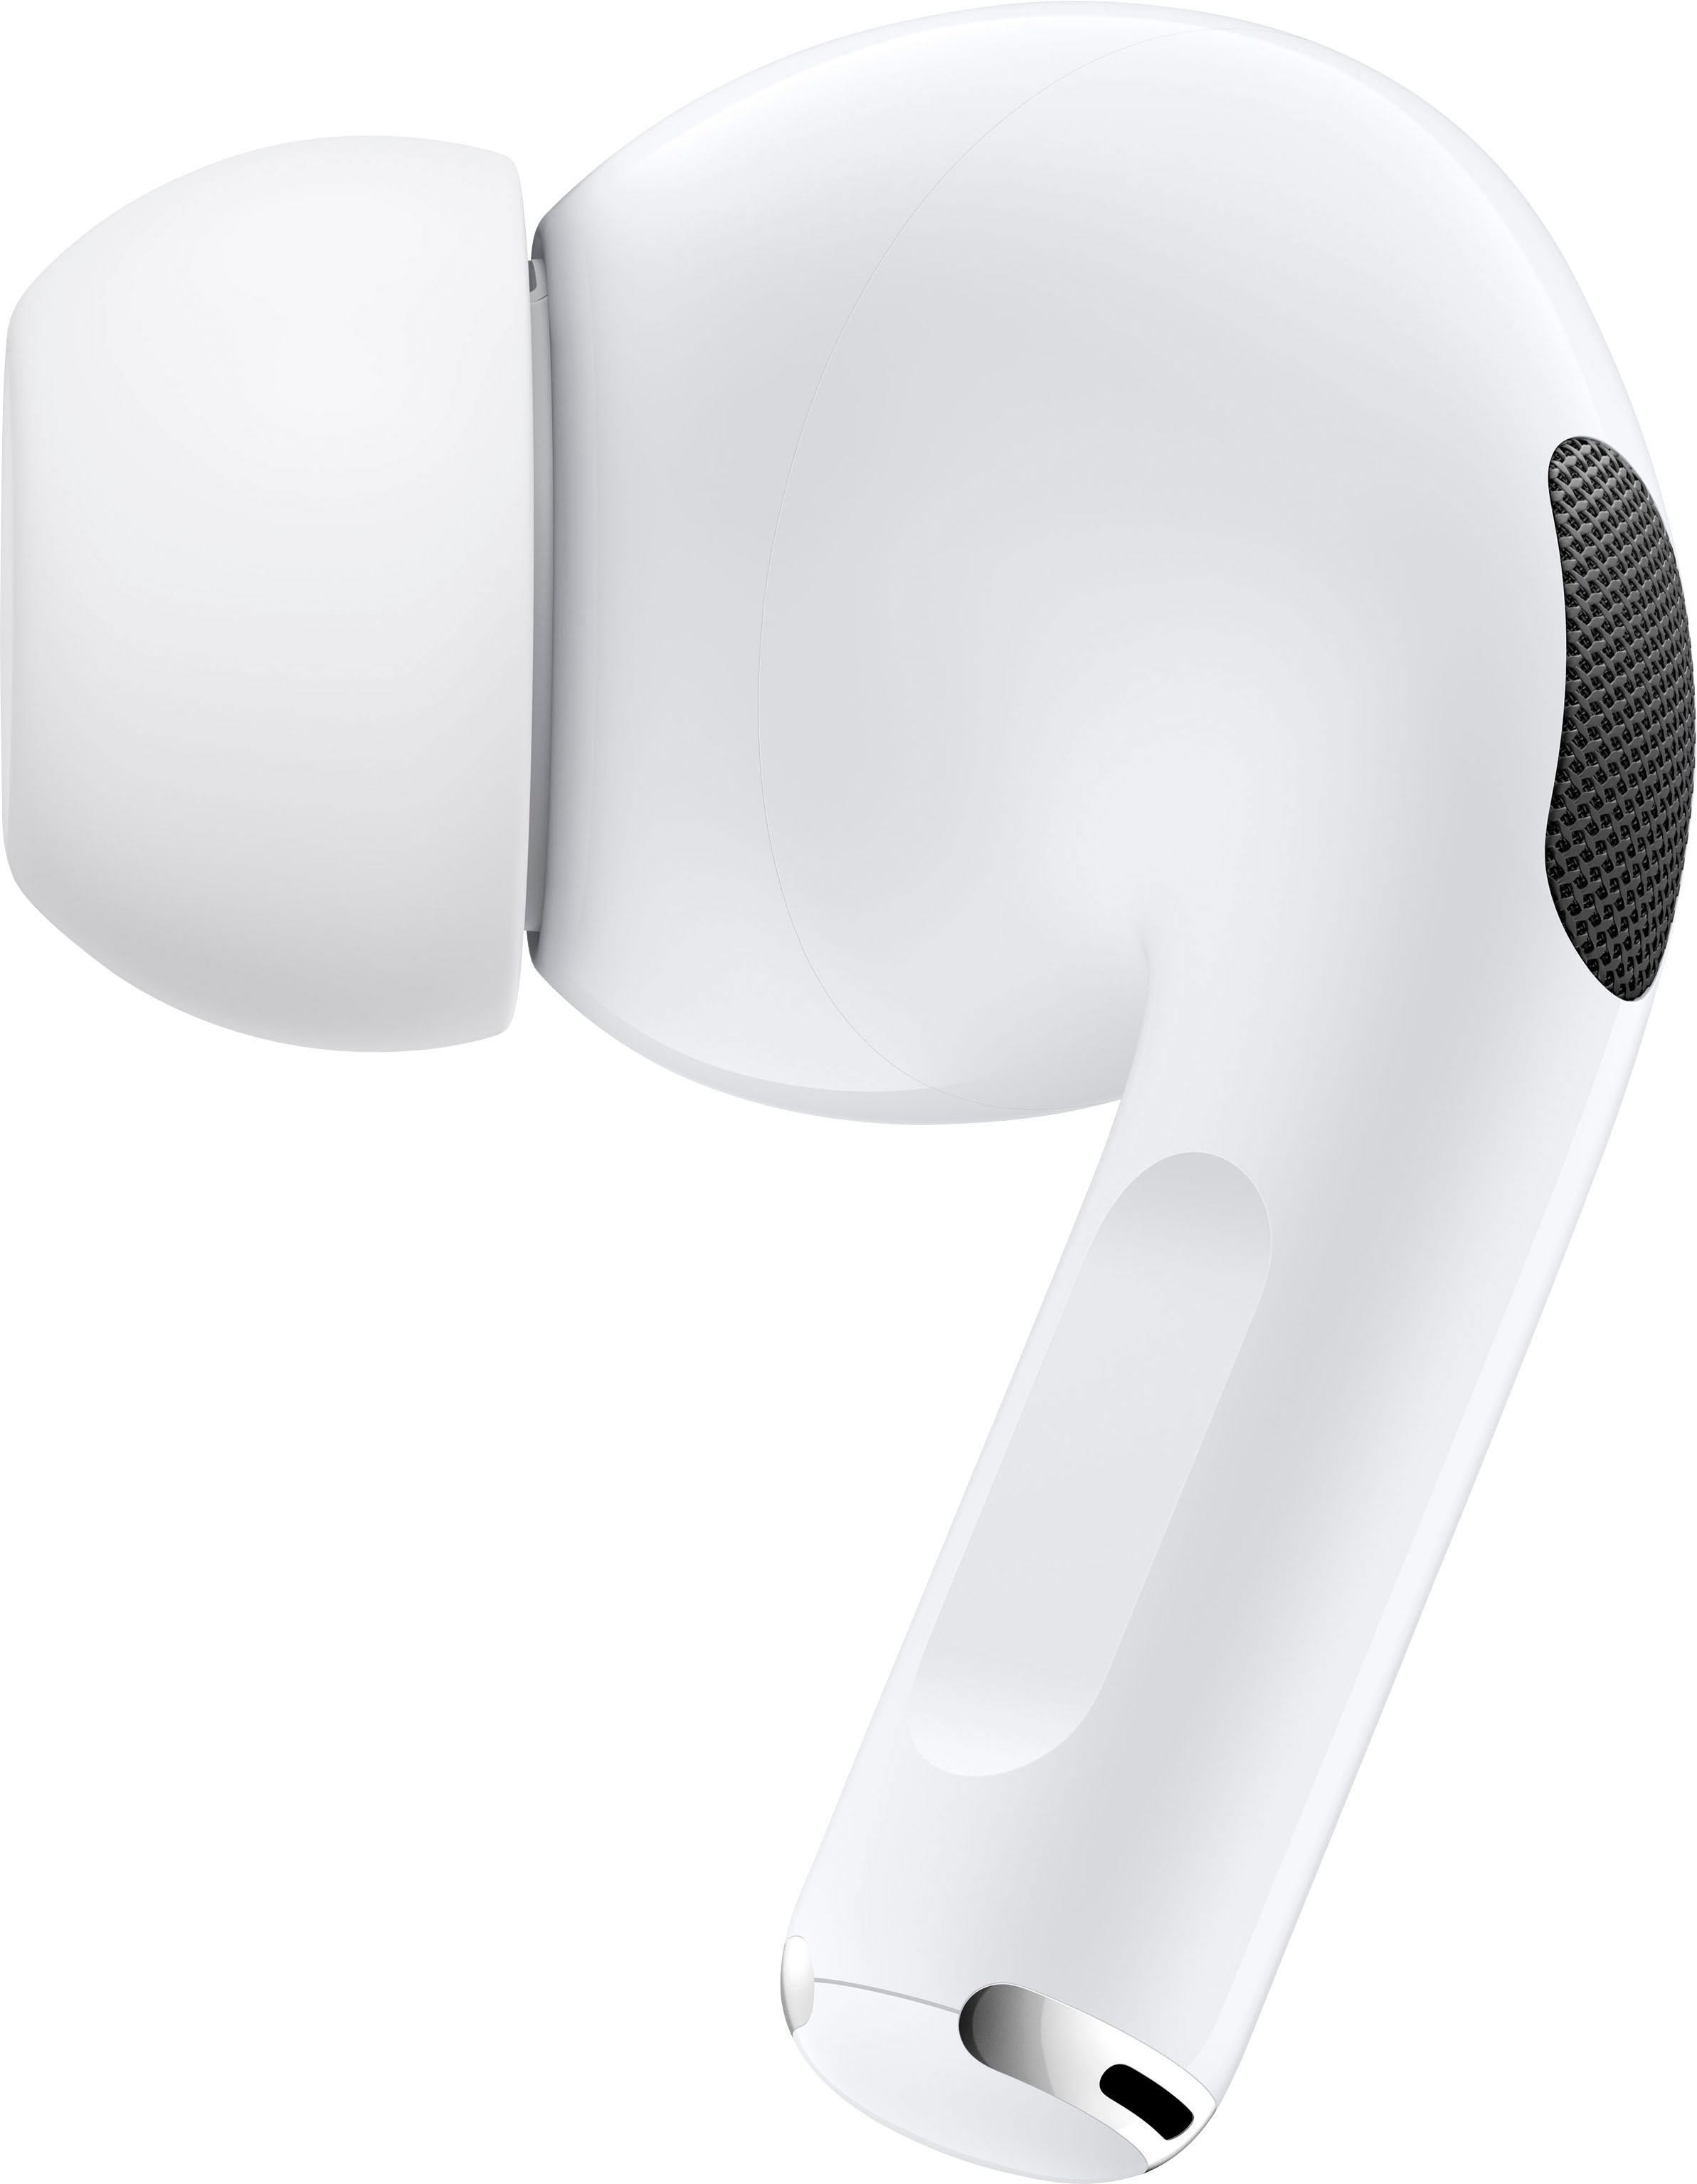 Apple - Geek Squad Certified Refurbished AirPods Pro